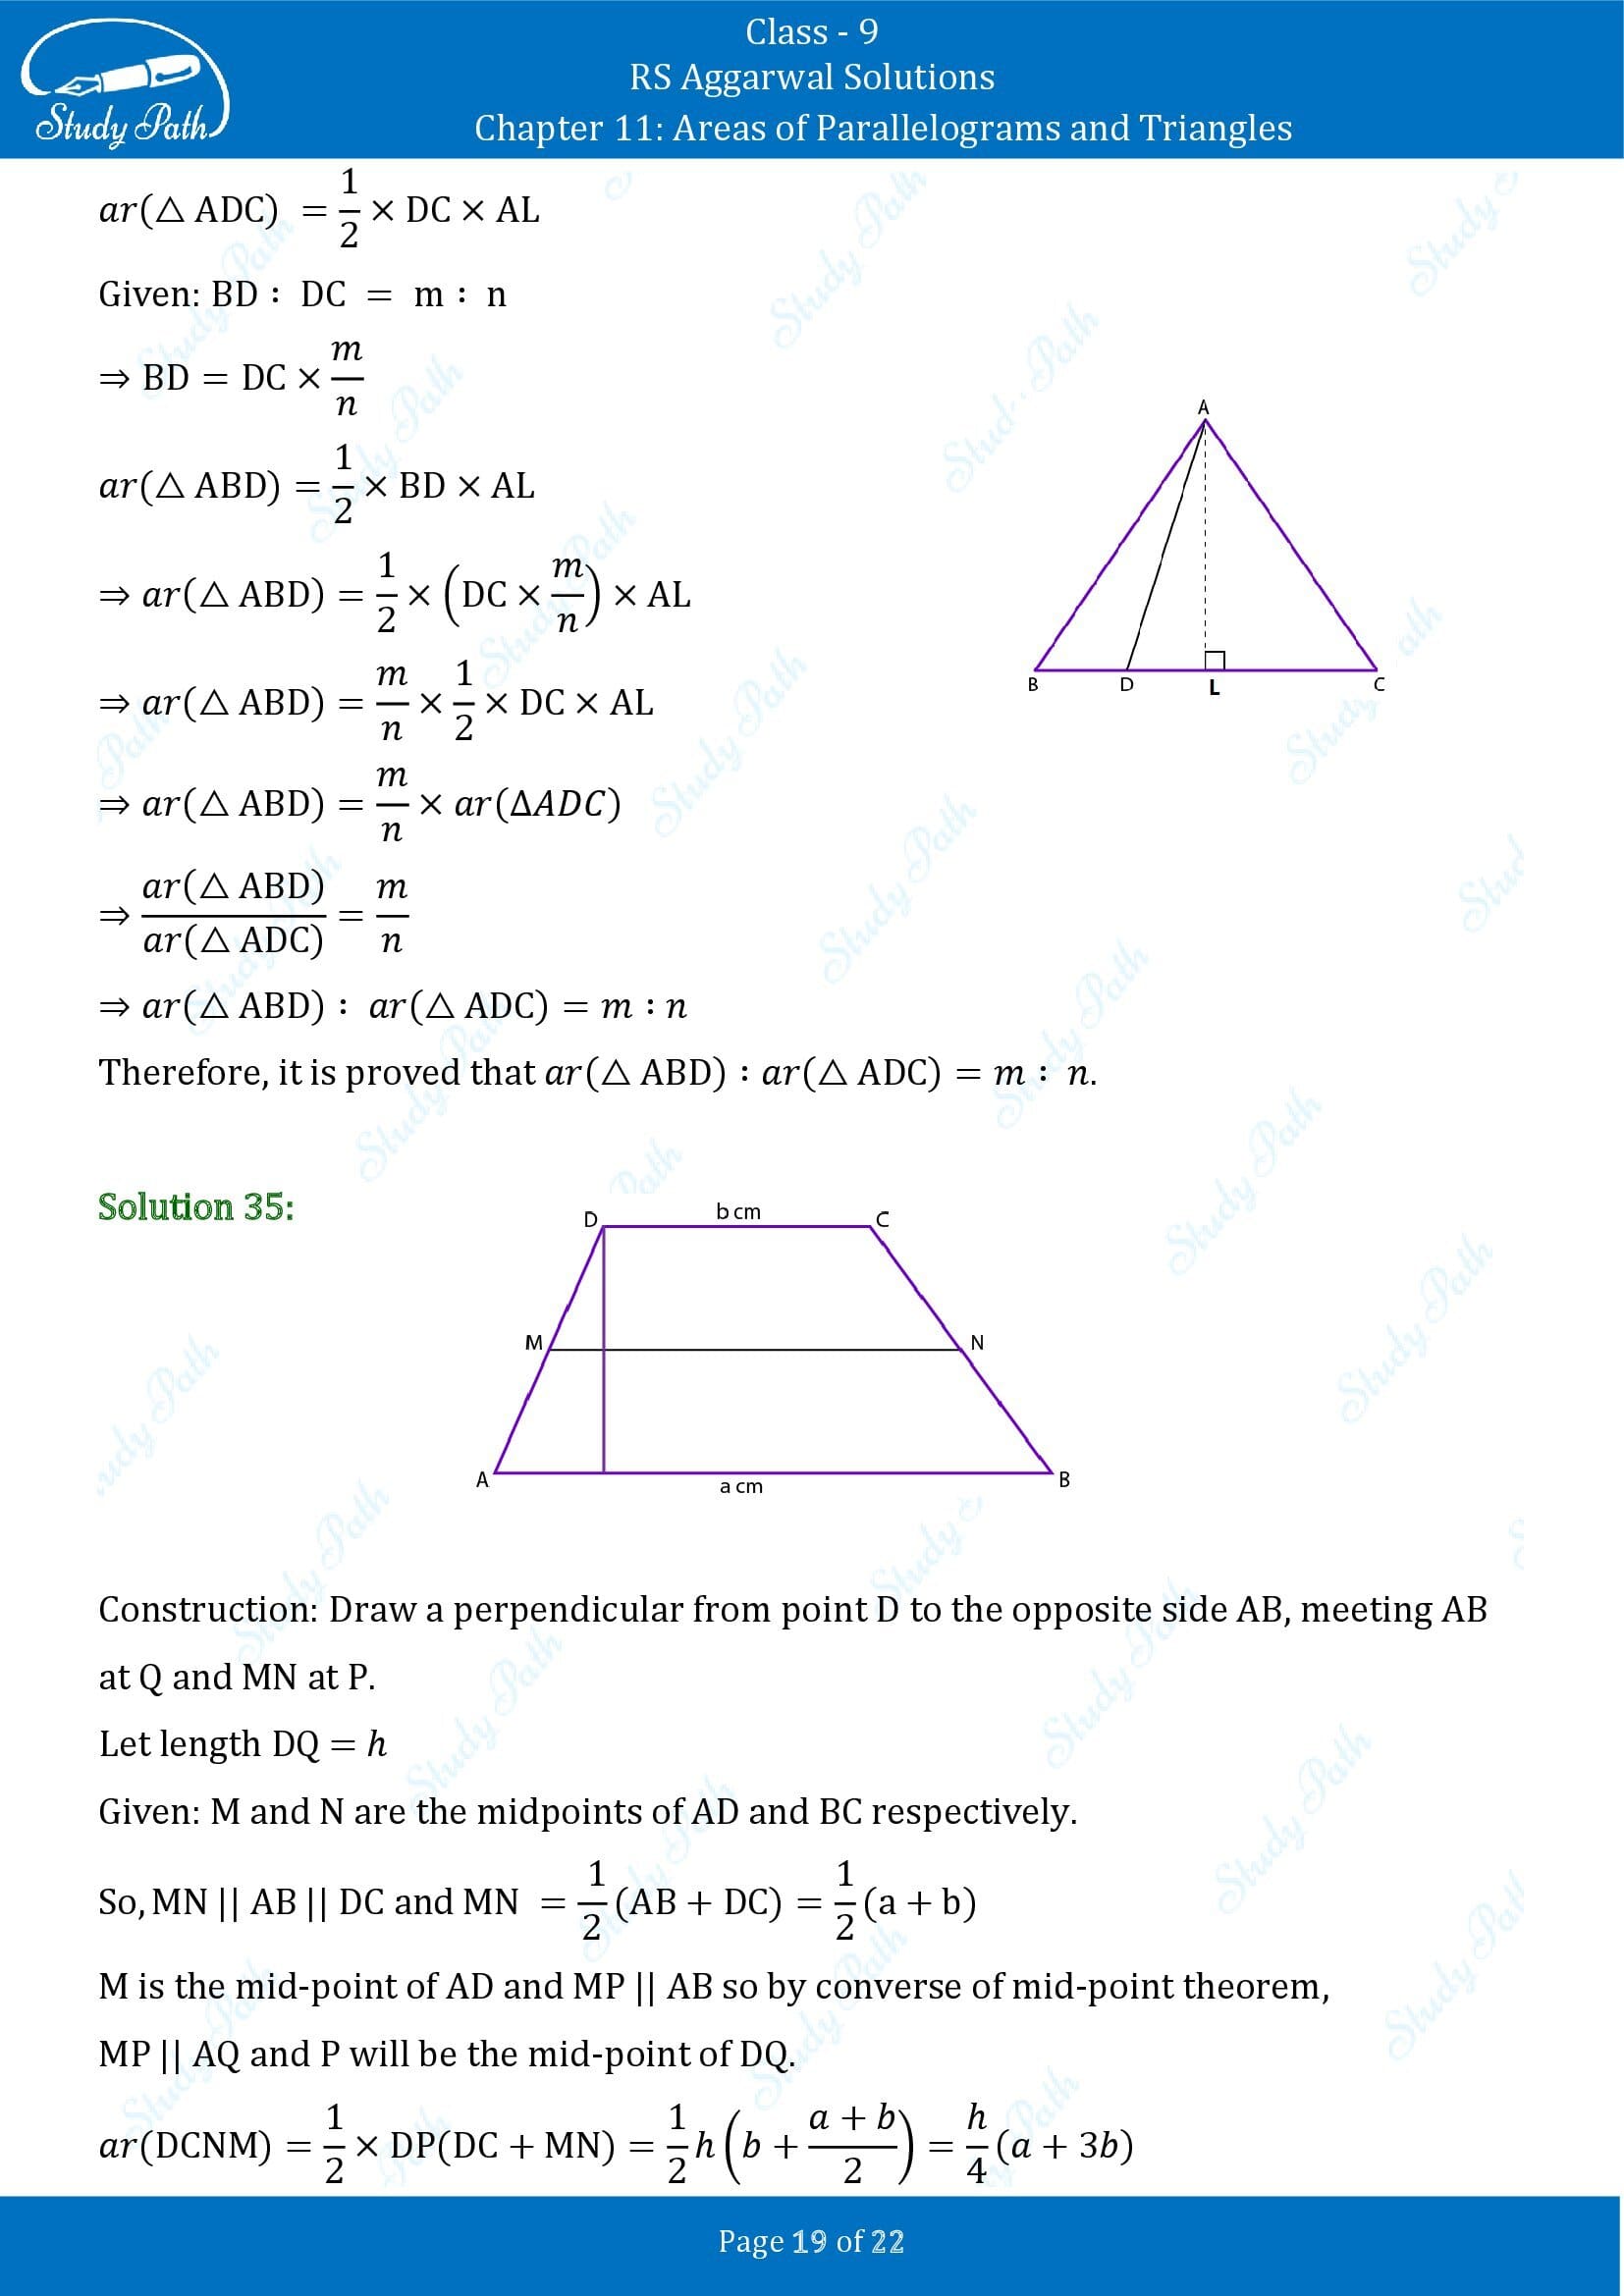 RS Aggarwal Solutions Class 9 Chapter 11 Areas of Parallelograms and Triangles Exercise 11 00019